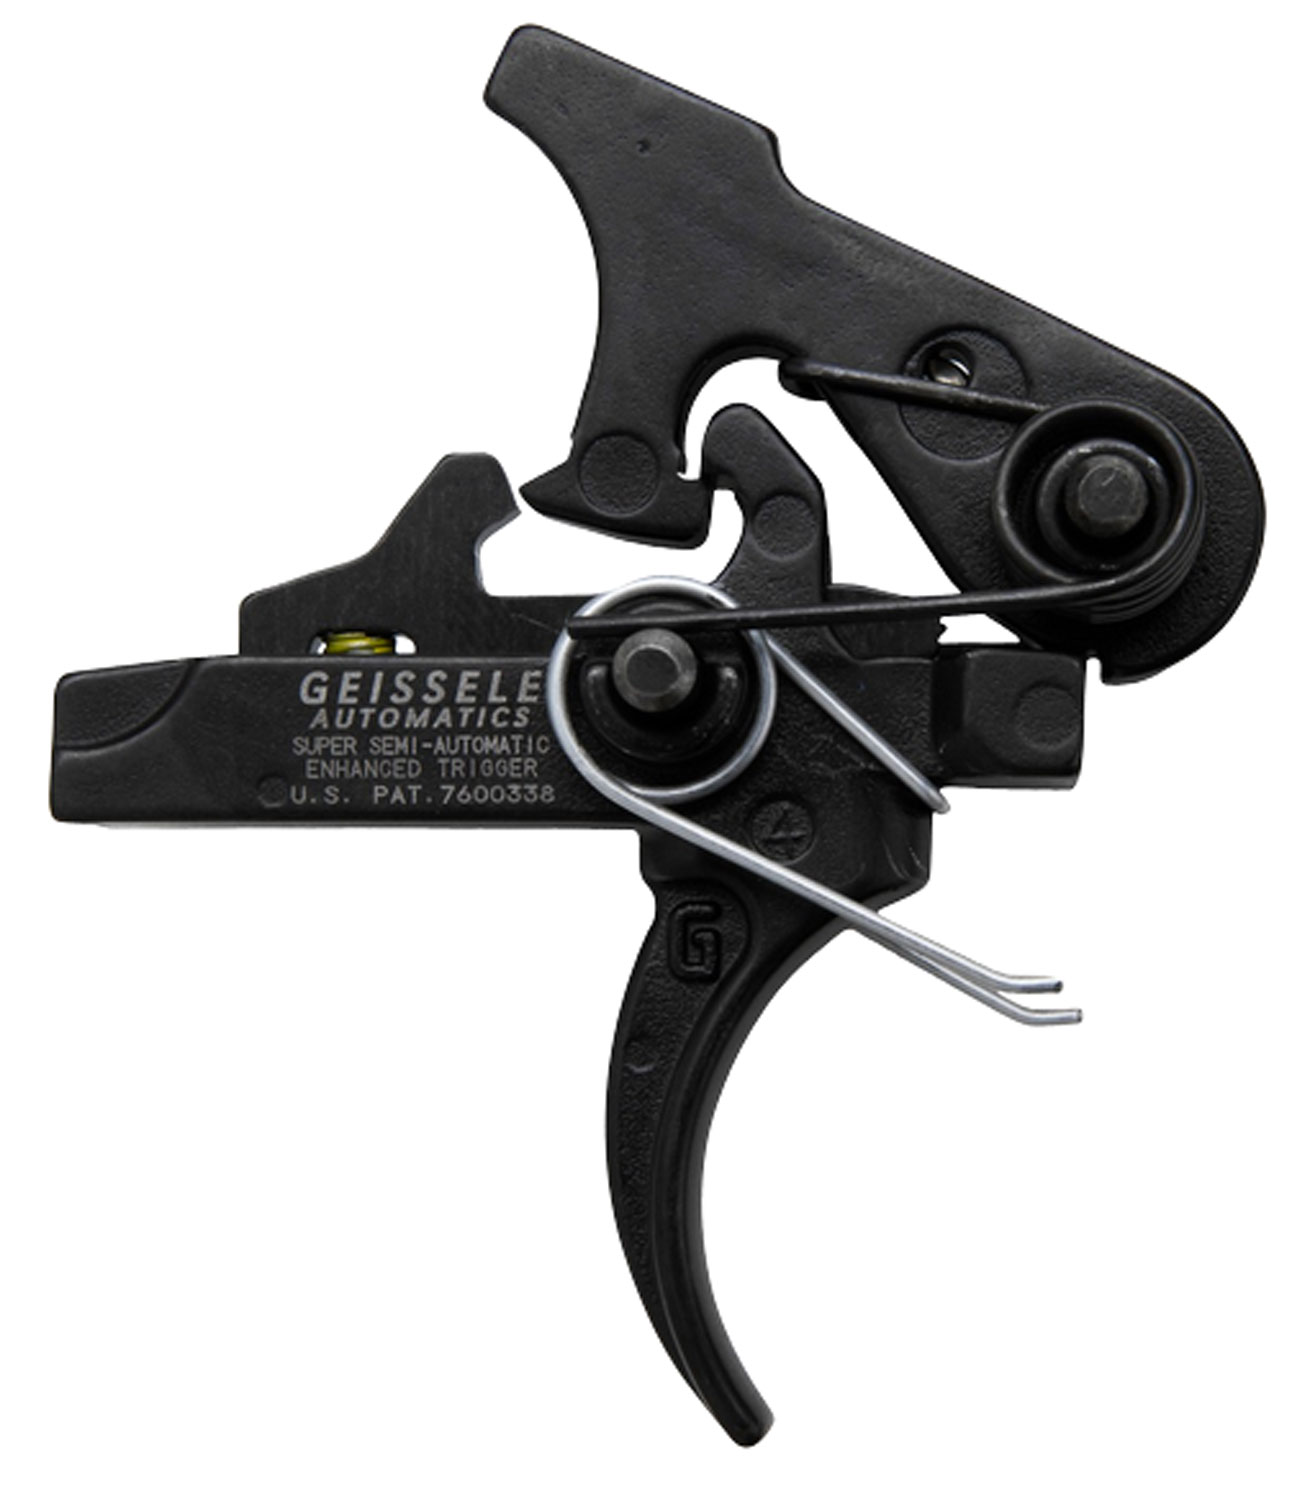 Geissele Automatics 05160 SSA-E  Two-Stage Curved Trigger with 2.90-3.80 lbs Draw Weight & Black Oxide Finish for AR-Platform